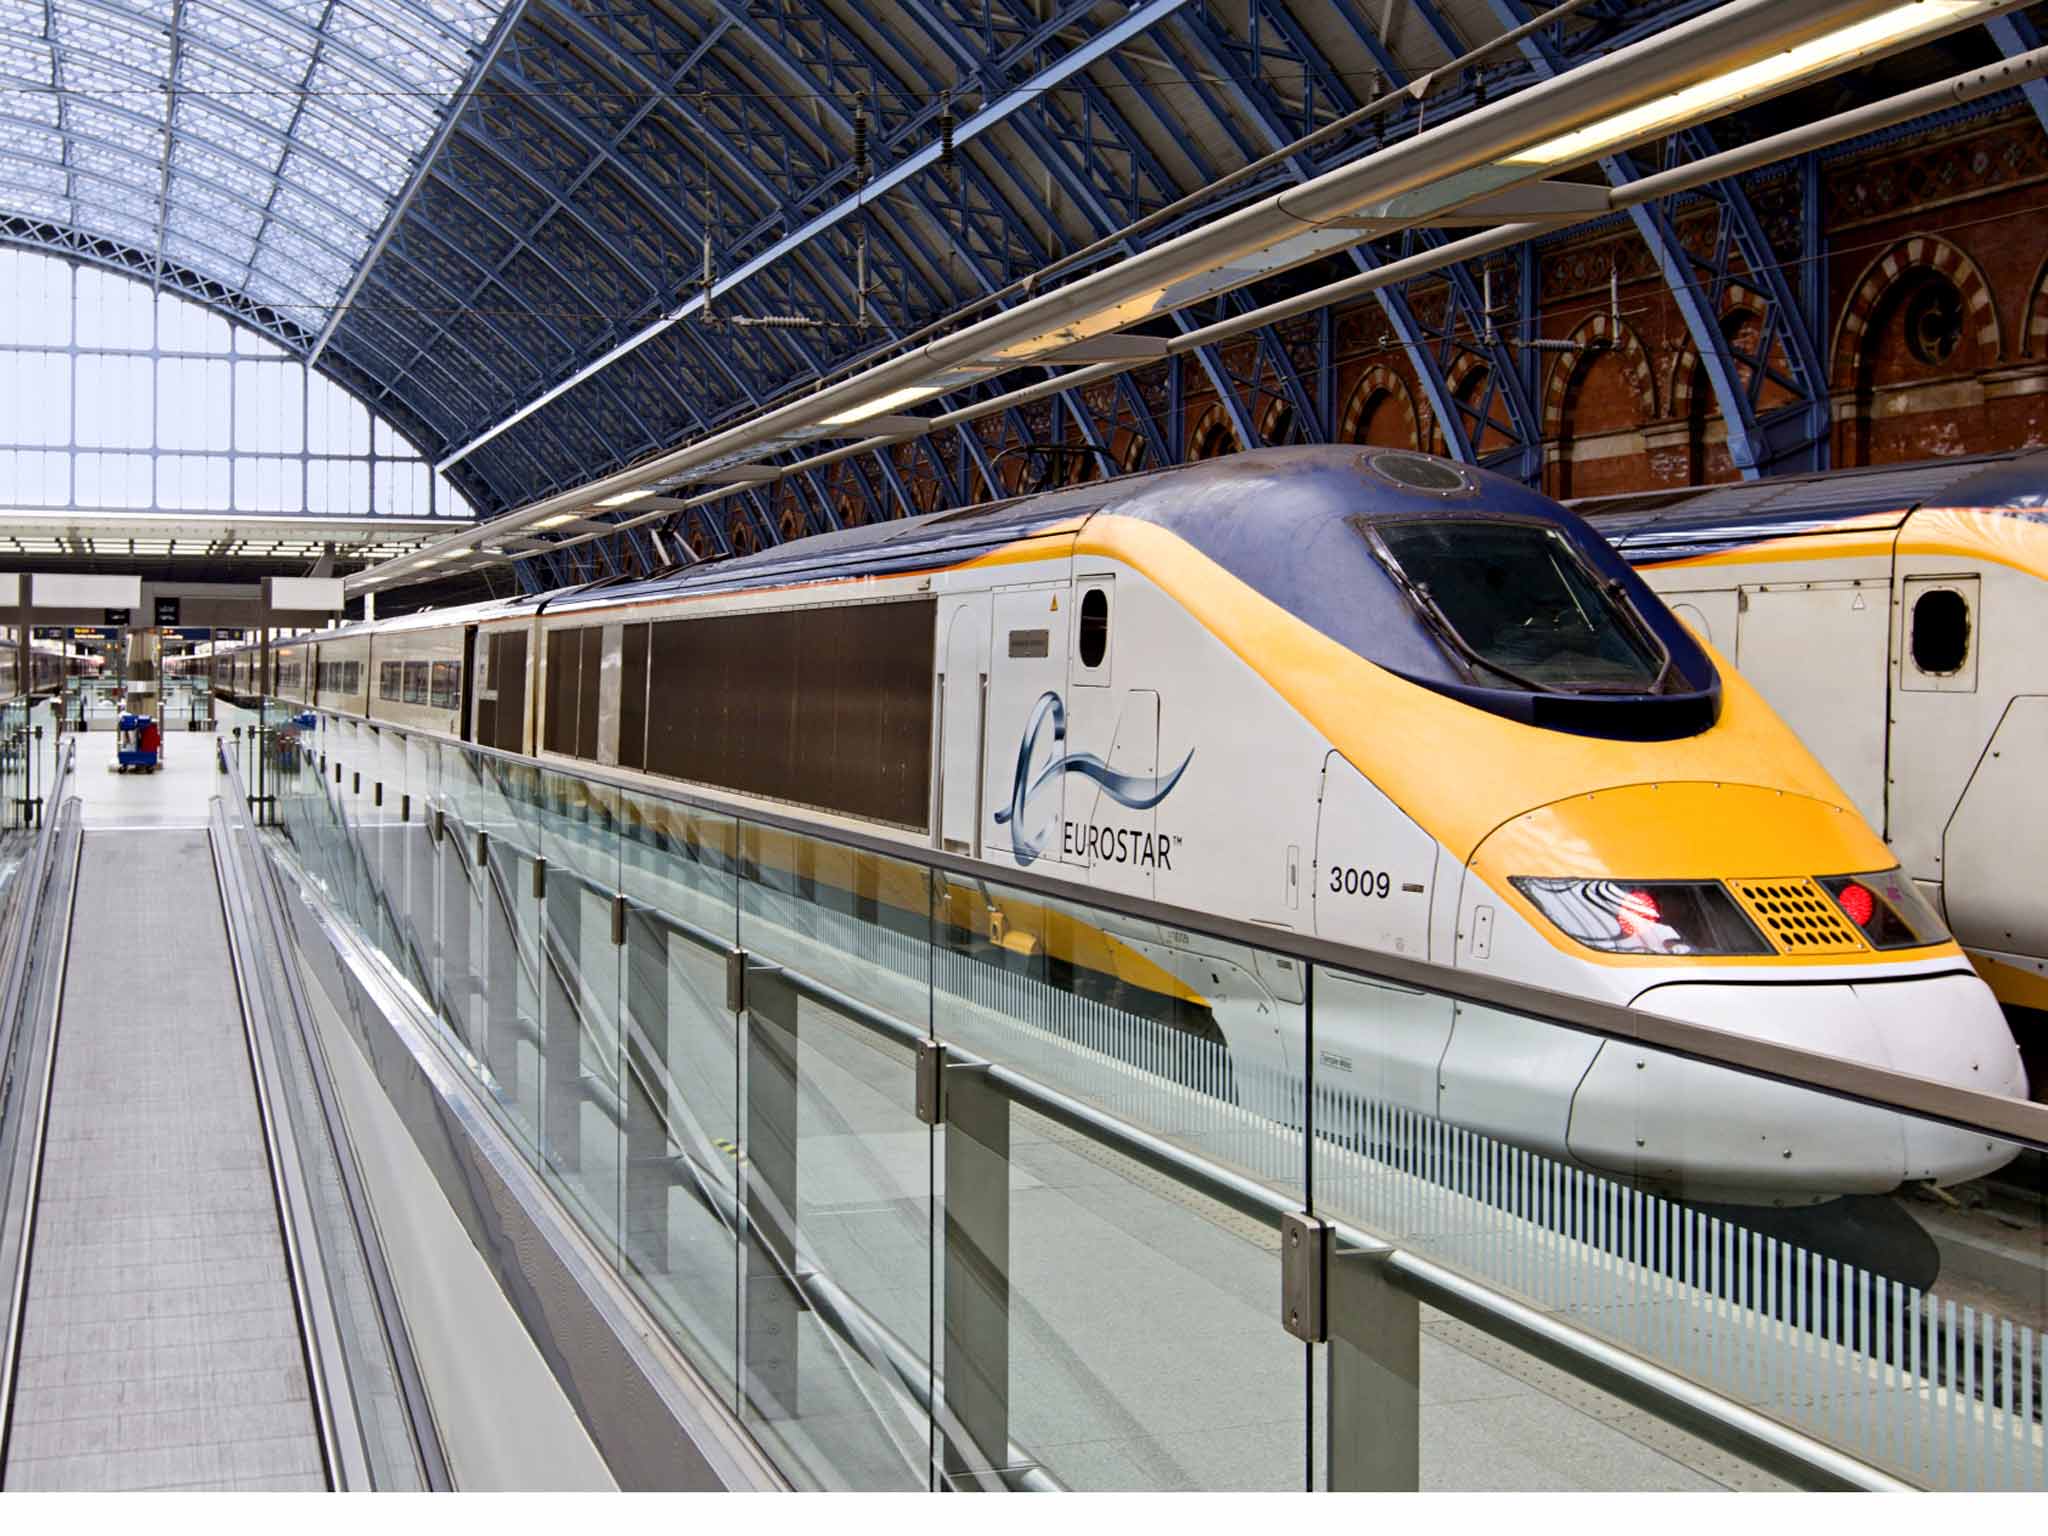 Eurostar celebrates 20 years of service; the train links London with Brussels and Paris